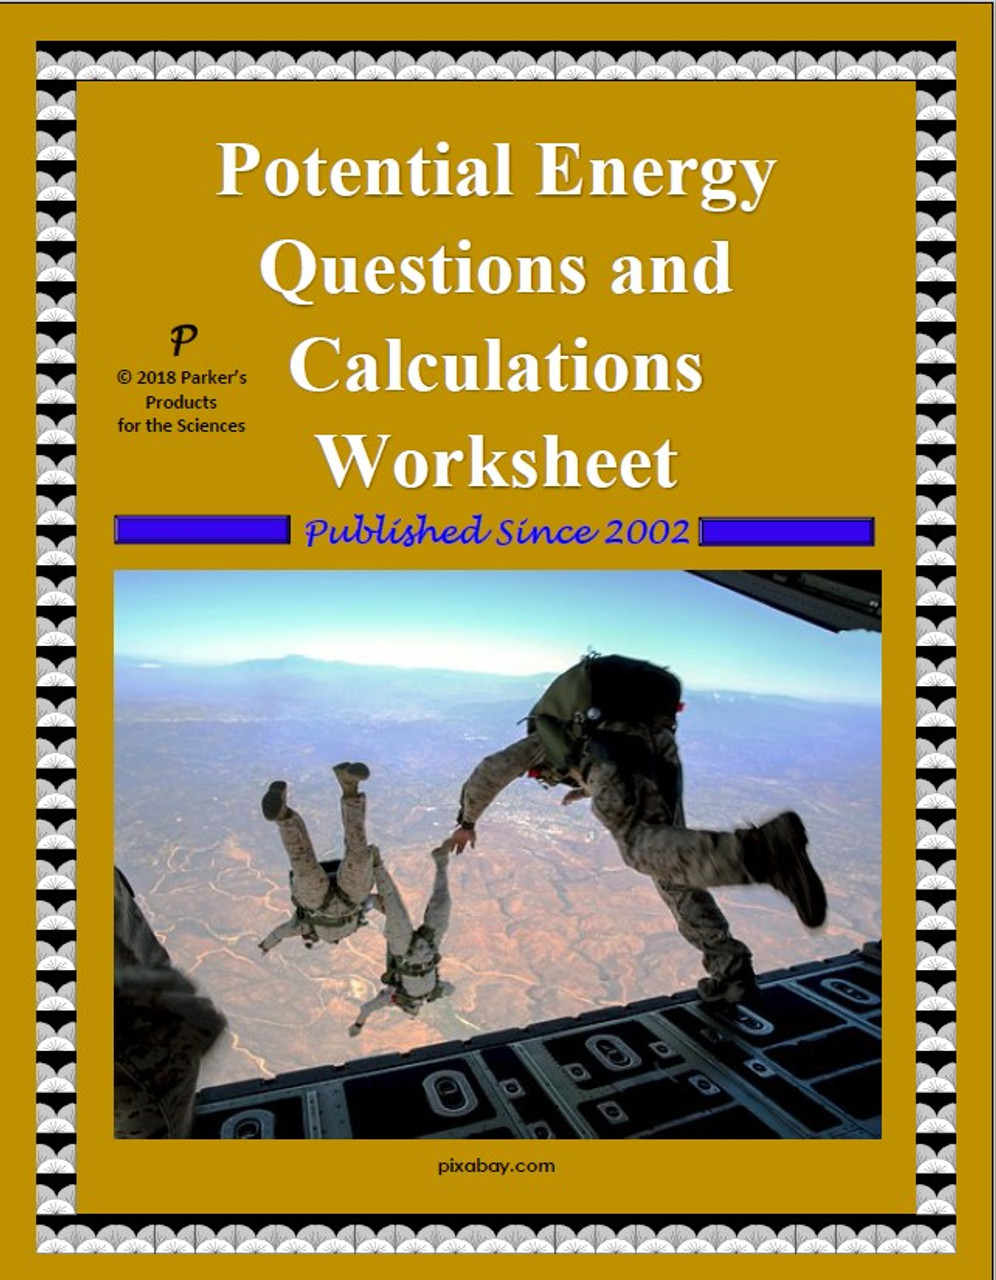 Potential Energy Questions and Calculations Worksheet